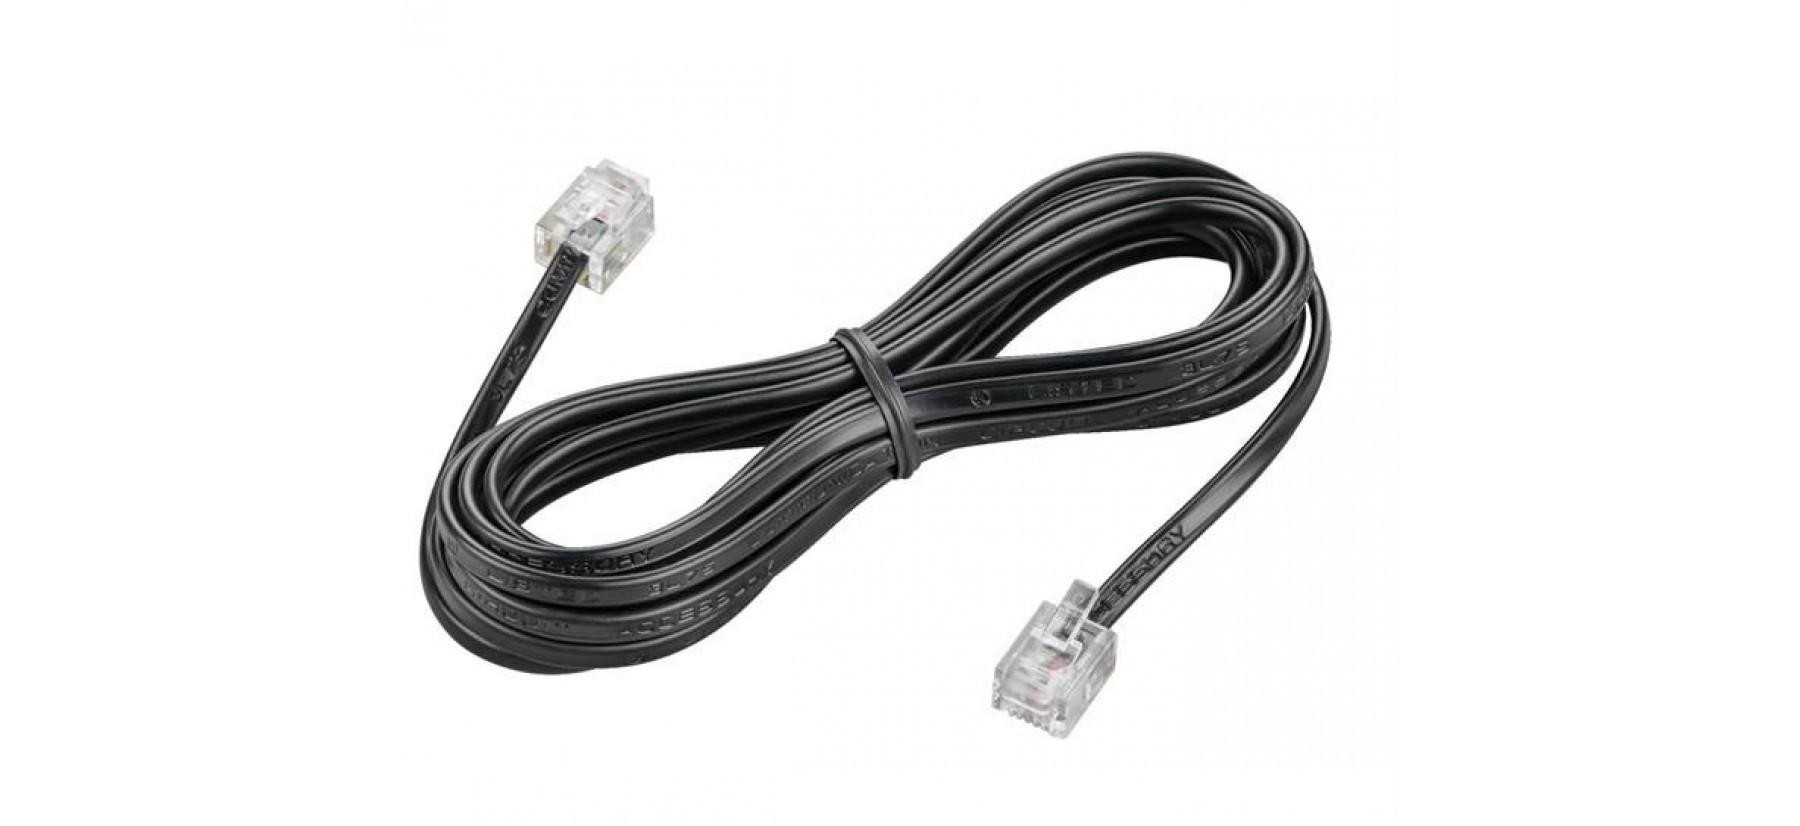 RJ11 Cable